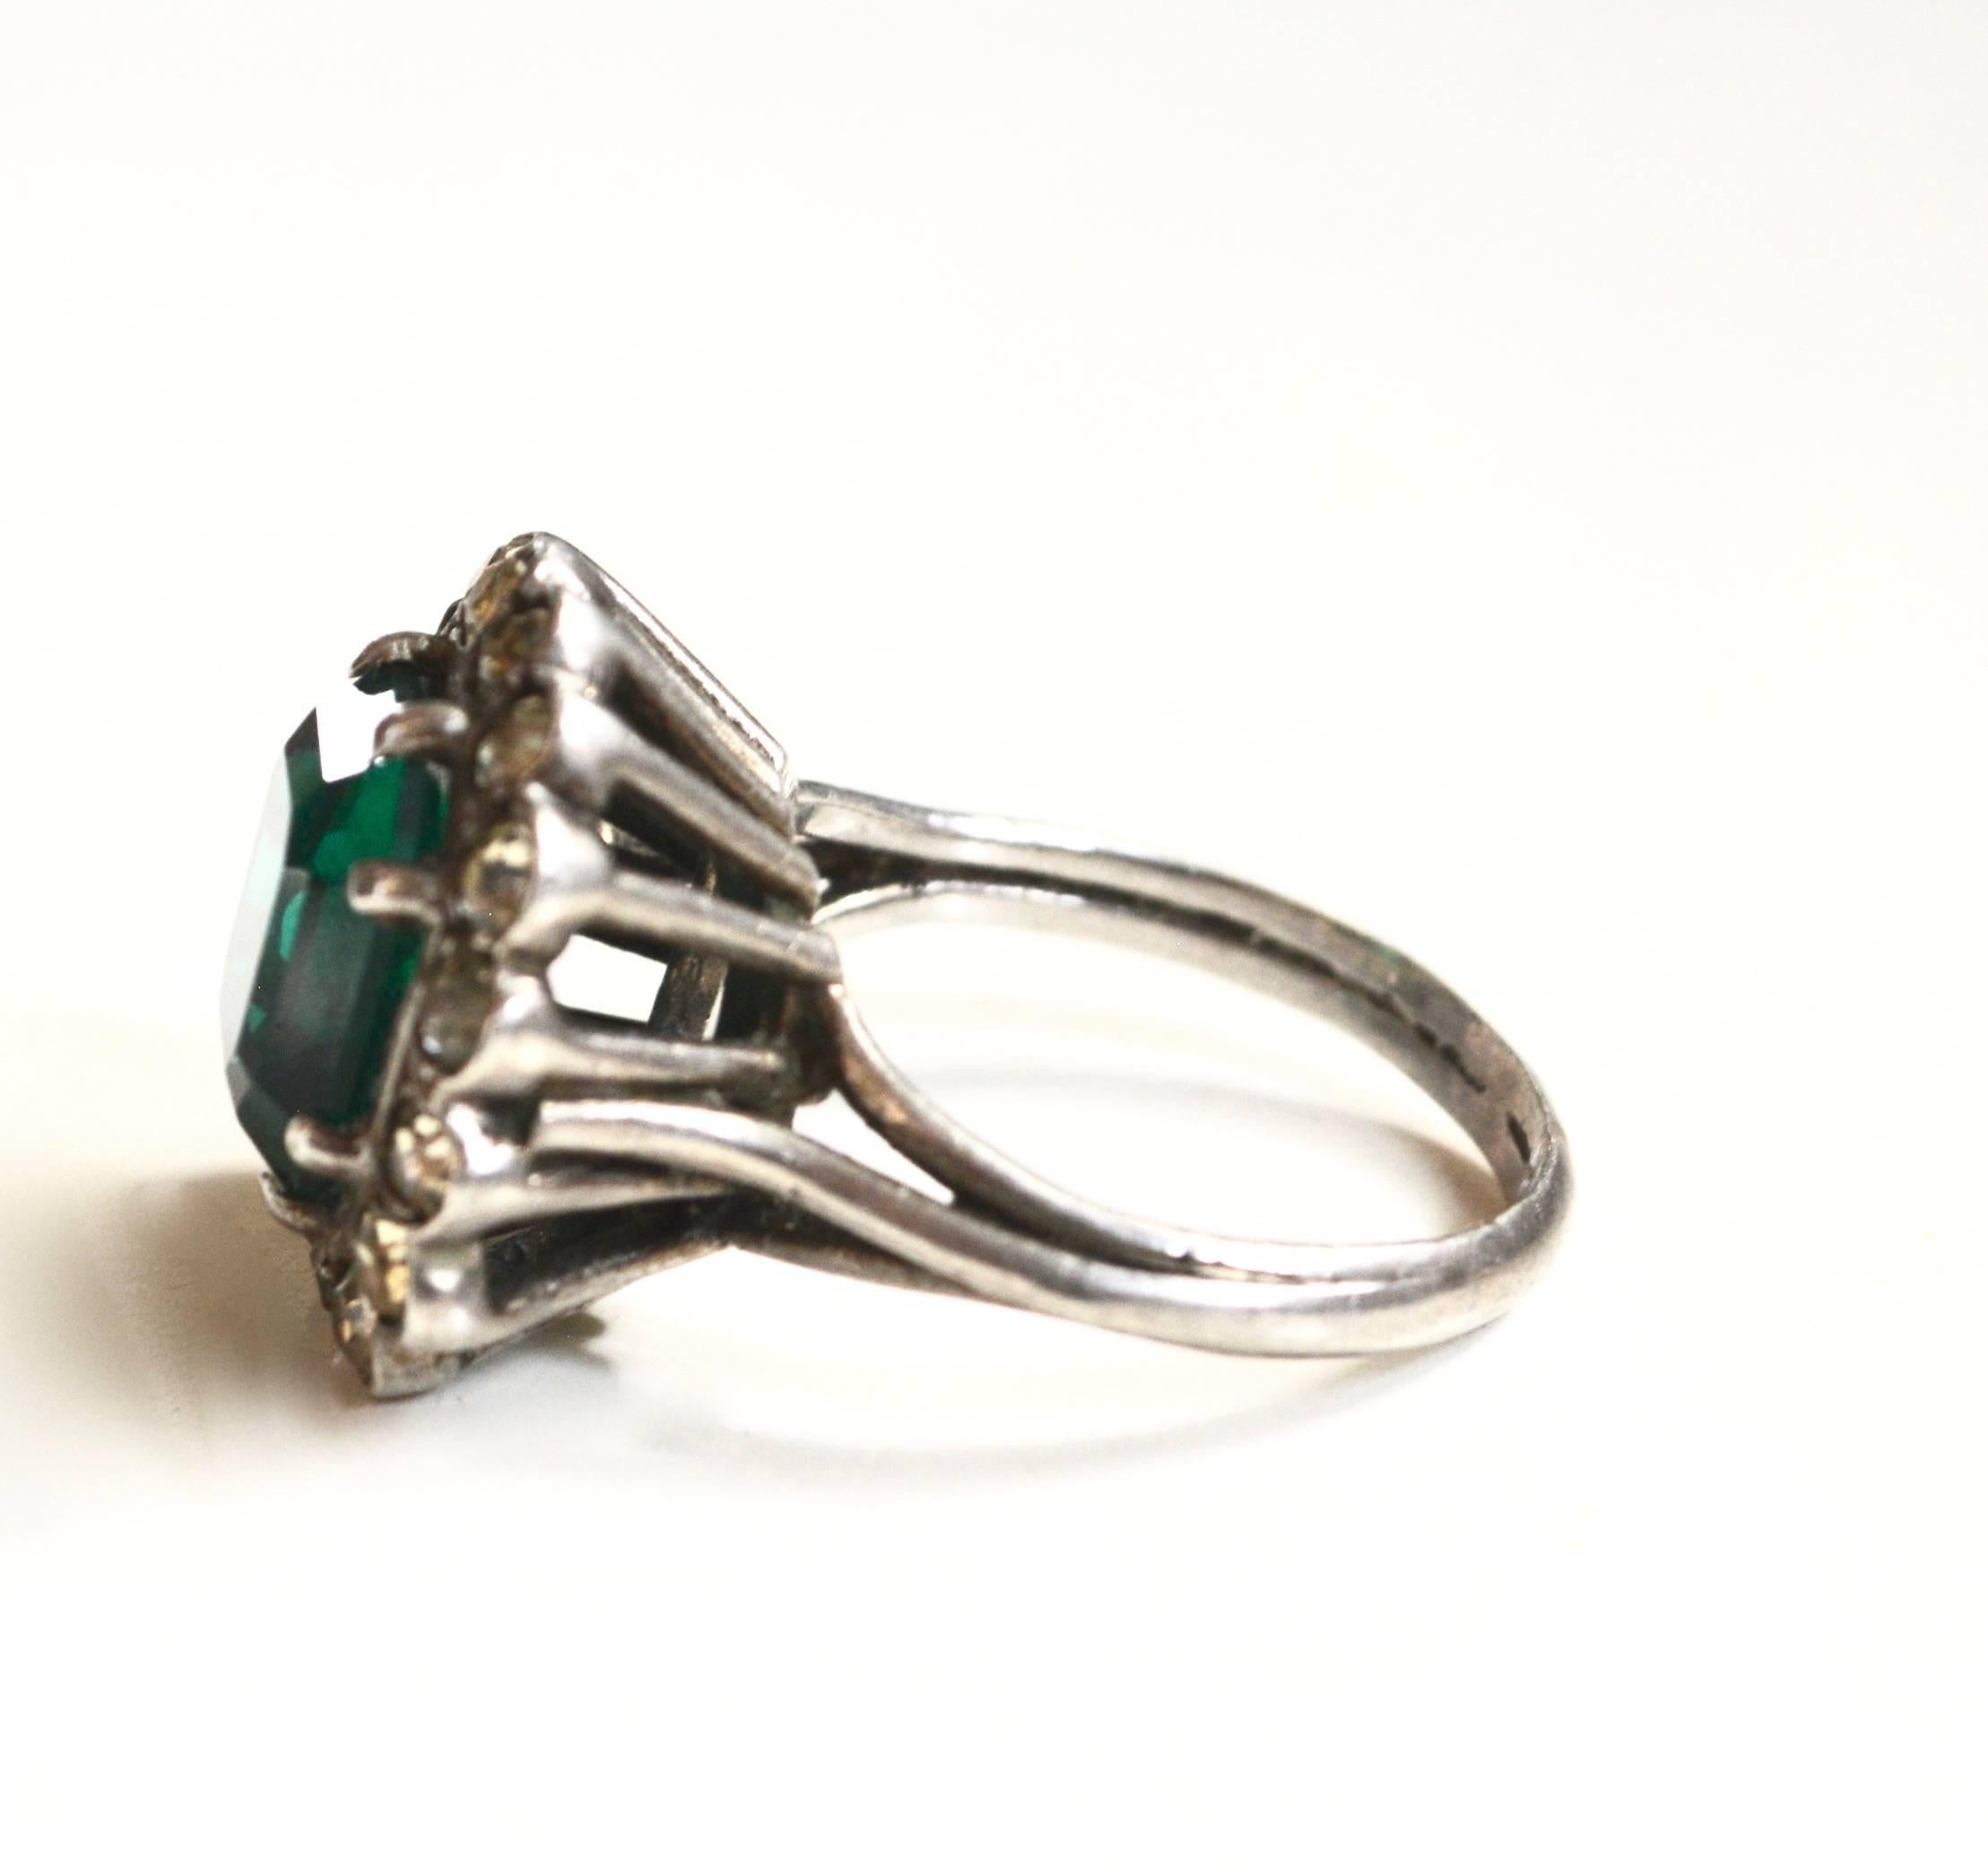 Vintage glass emerald-green and paste stone cocktail ring. French hallmark of a crab and illegible second symbol on the outside bottom area. Sterling tested. Face measures approximately 1.3"L. Mild wear and tarnish.